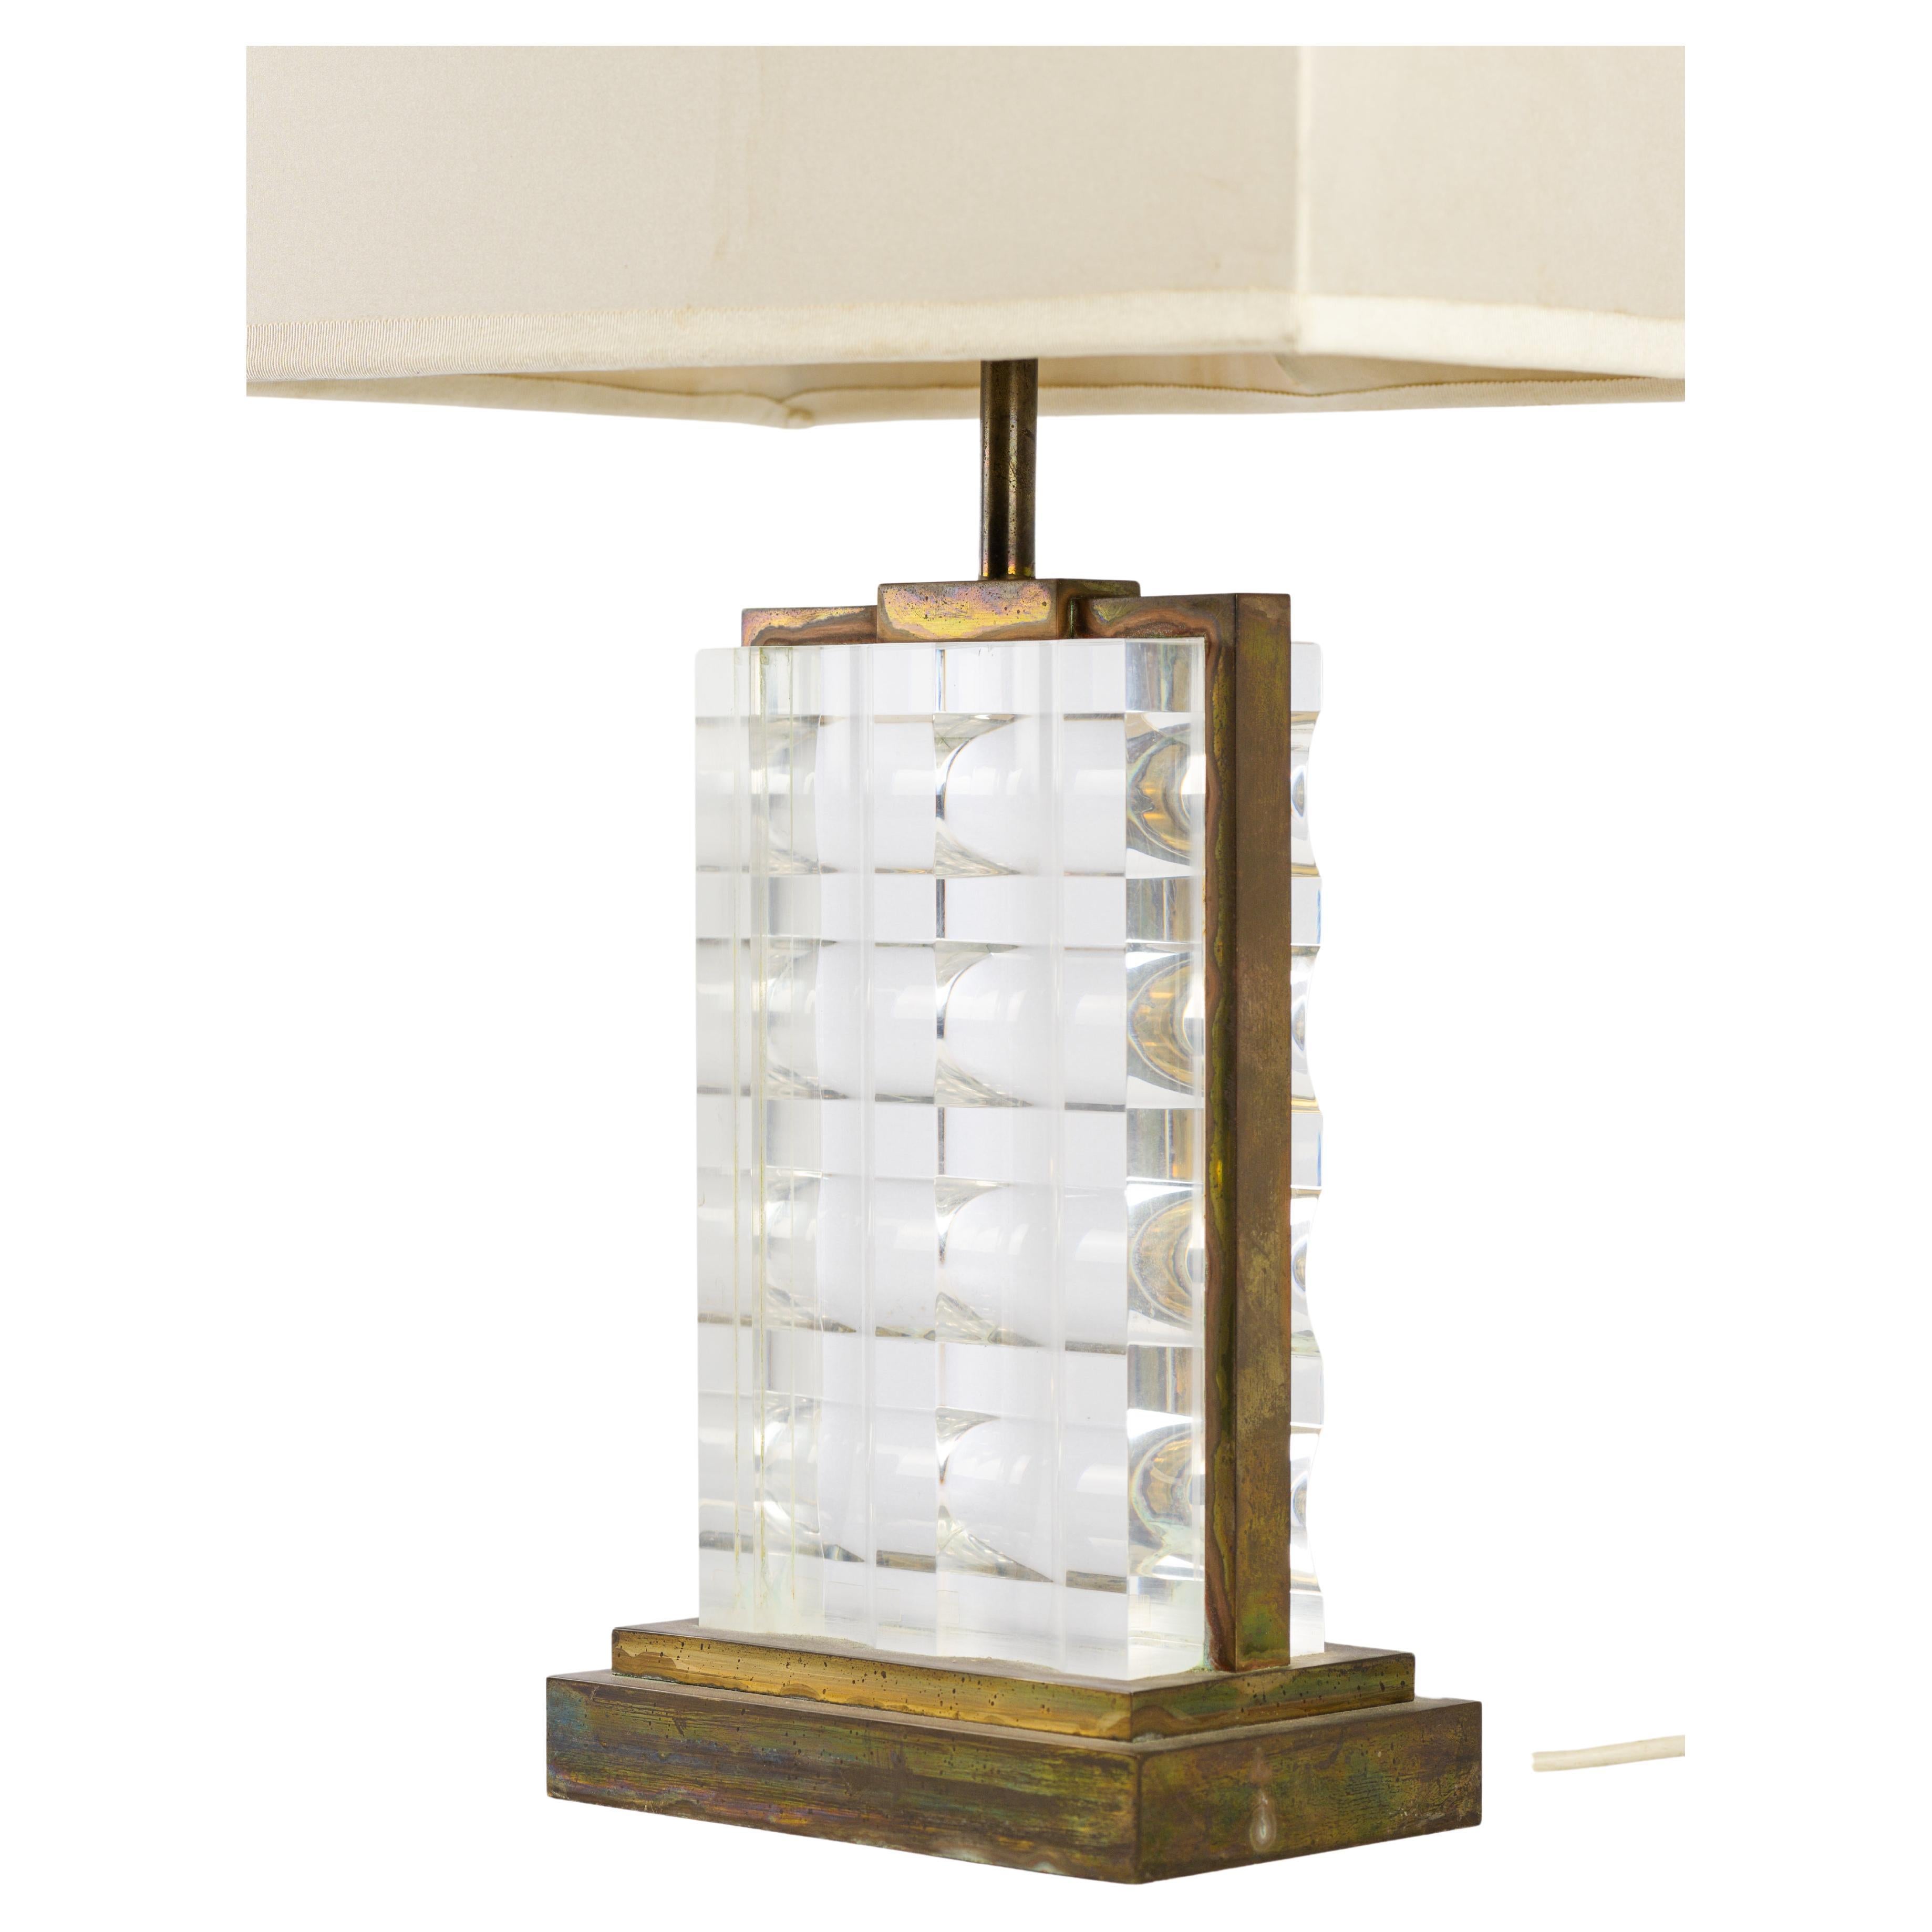 Beautiful table lamp in glass and brass by S.Petti